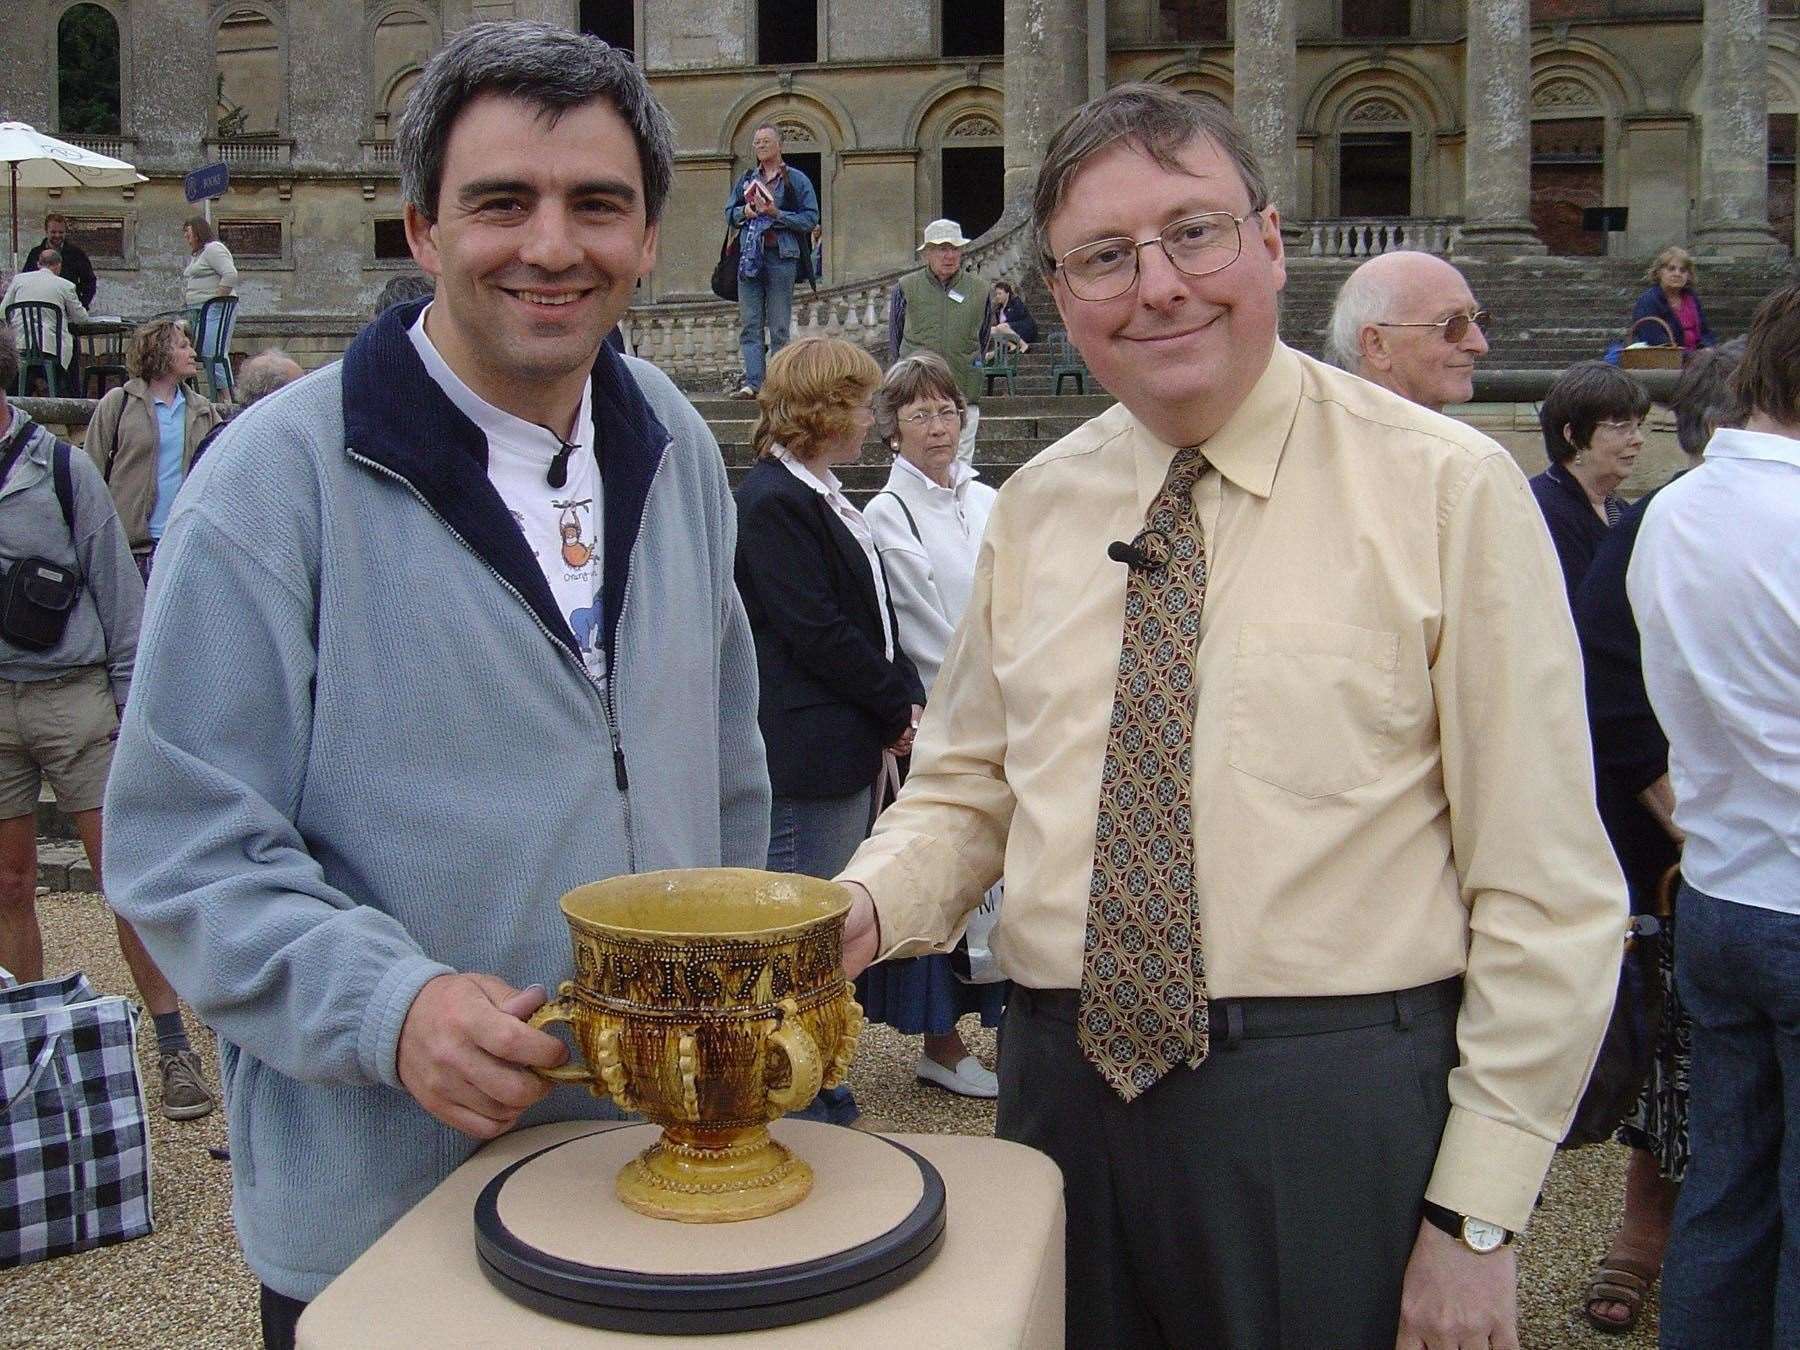 Antiques expert John Sandon, right, with the 17th century slipware cup he valued on Antiques Roadshow (BBC/PA)